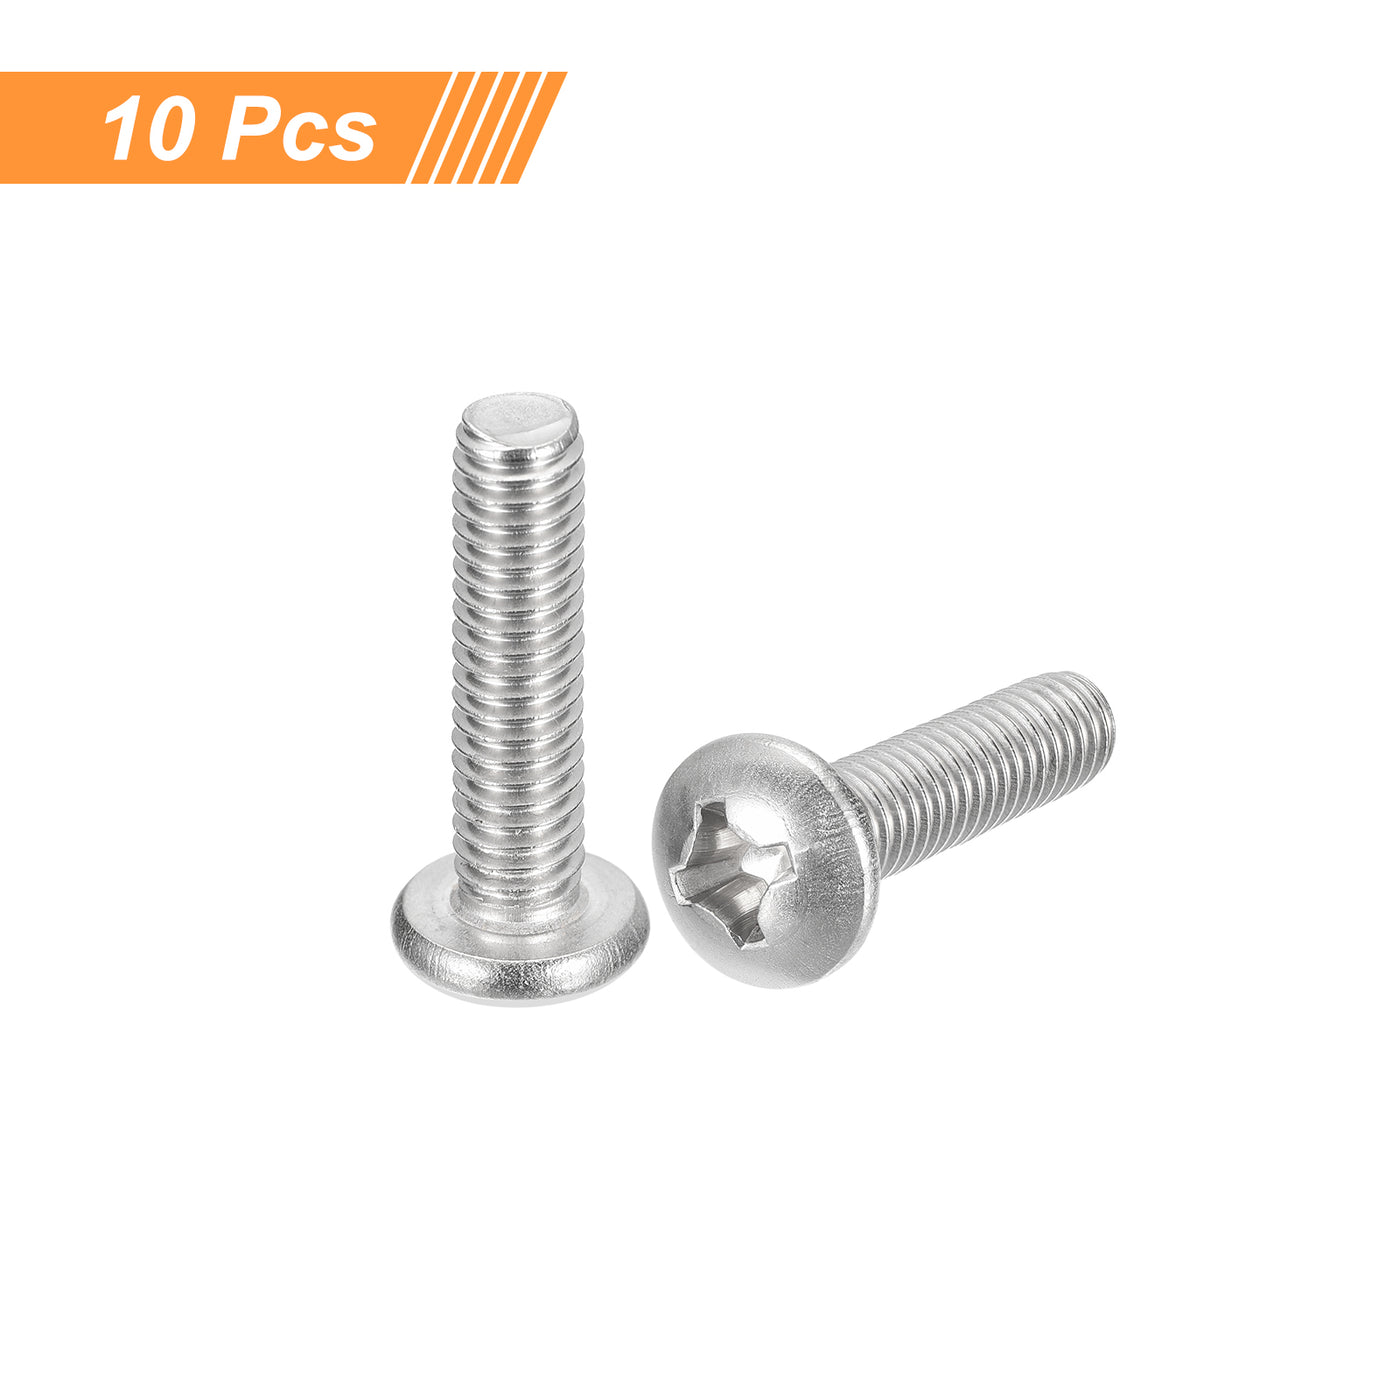 uxcell Uxcell 5/16-18x1-1/4" Pan Head Machine Screws, Stainless Steel 18-8 Screw, Pack of 10